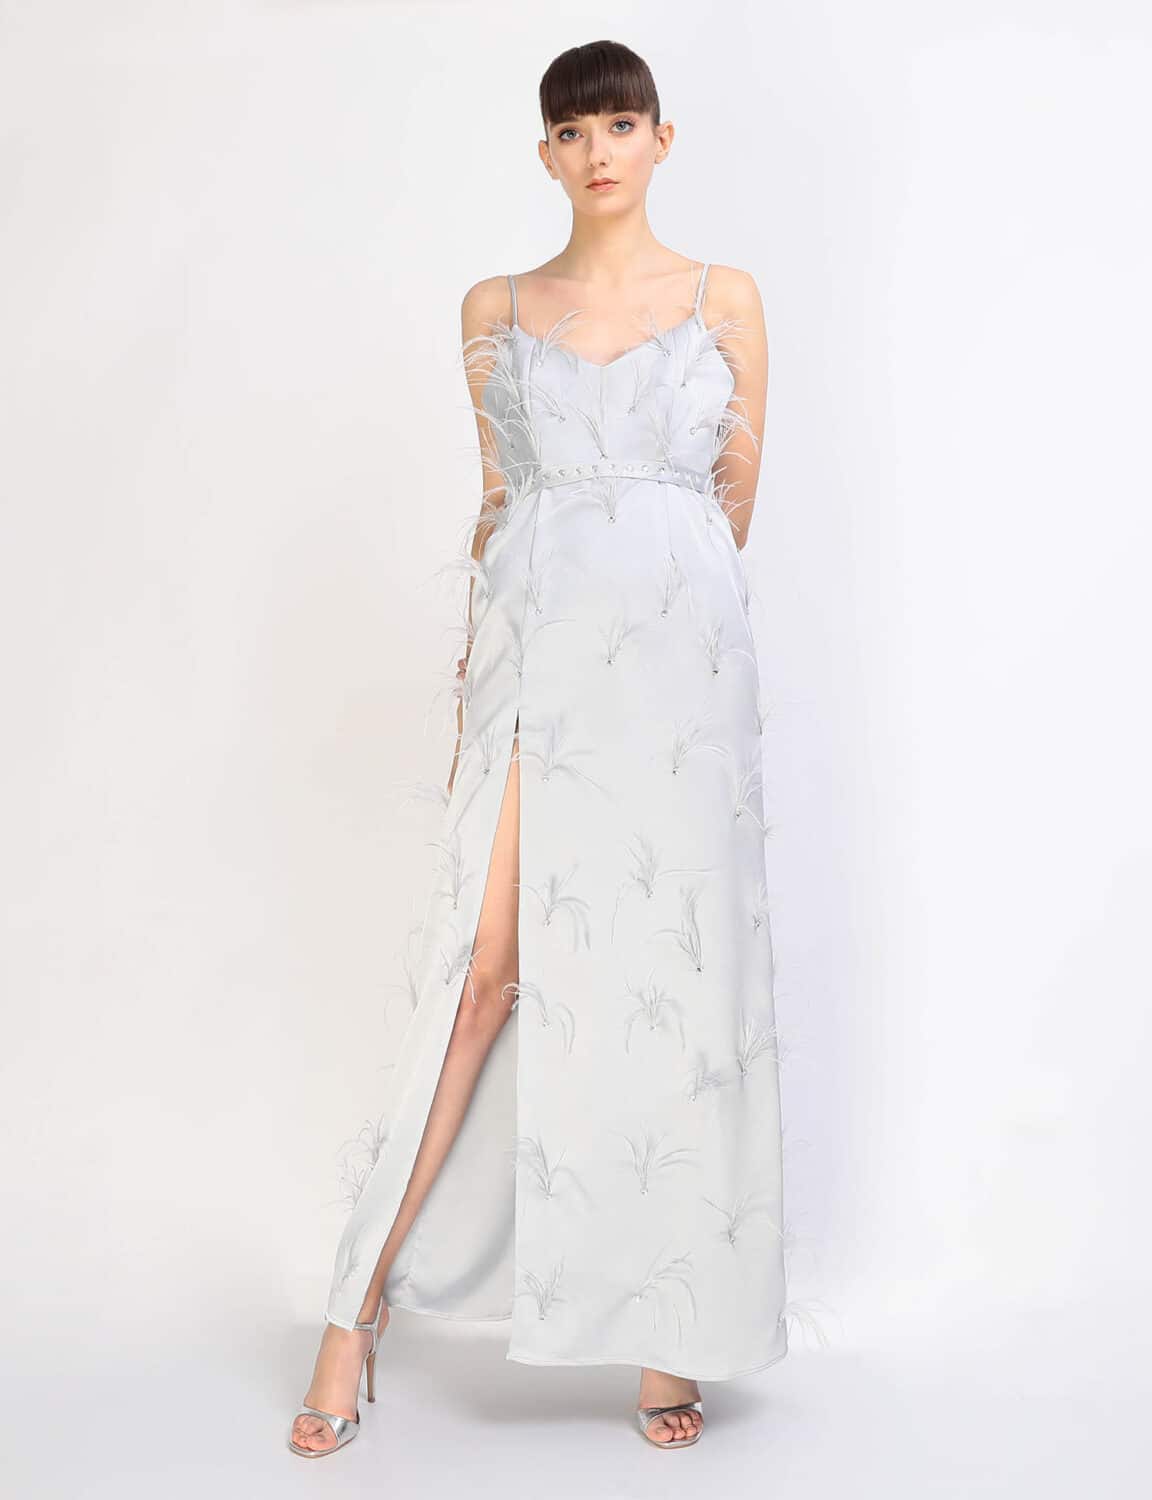 BIANCA grey long evening dress with feathers